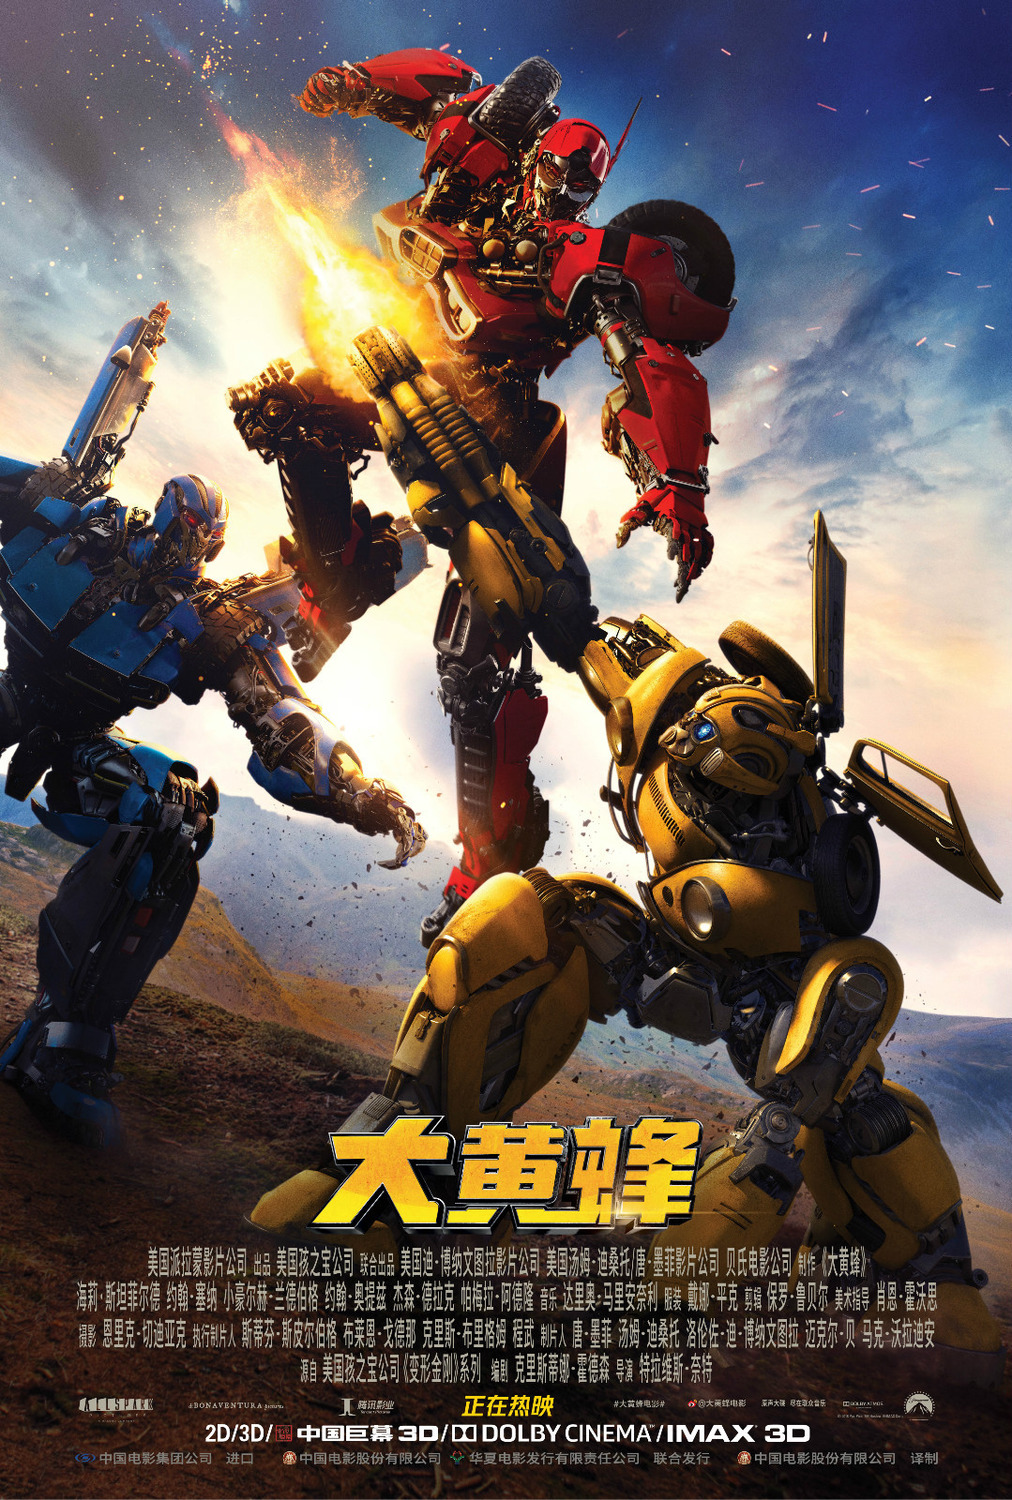 Extra Large Movie Poster Image for Bumblebee (#20 of 21)